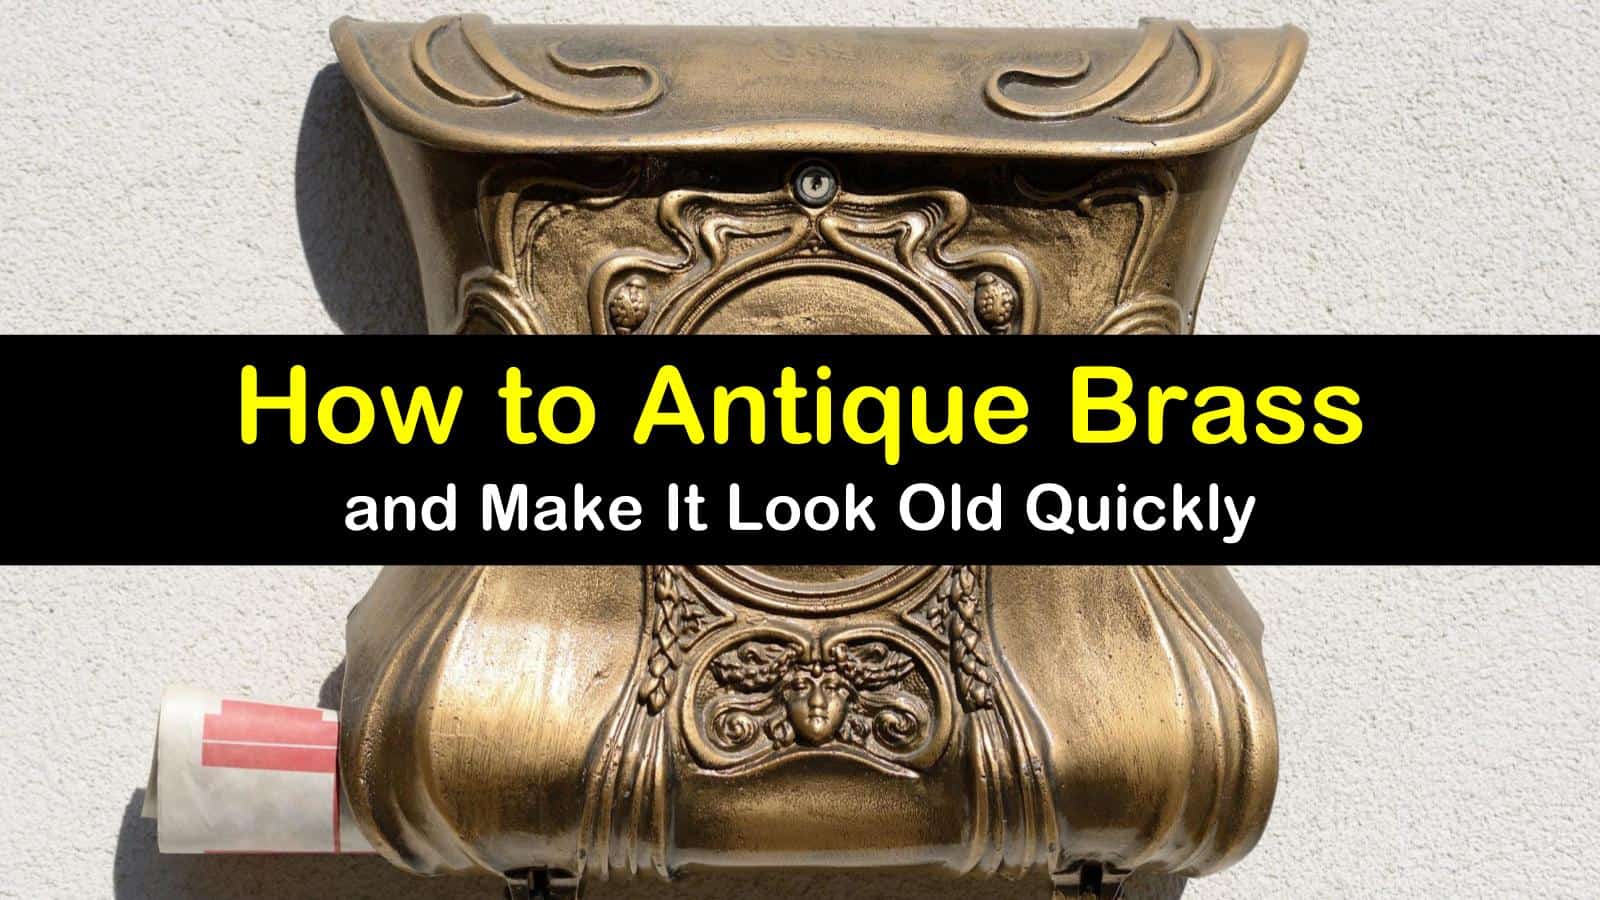 7 Quick Ways to Antique Brass and Make It Look Old